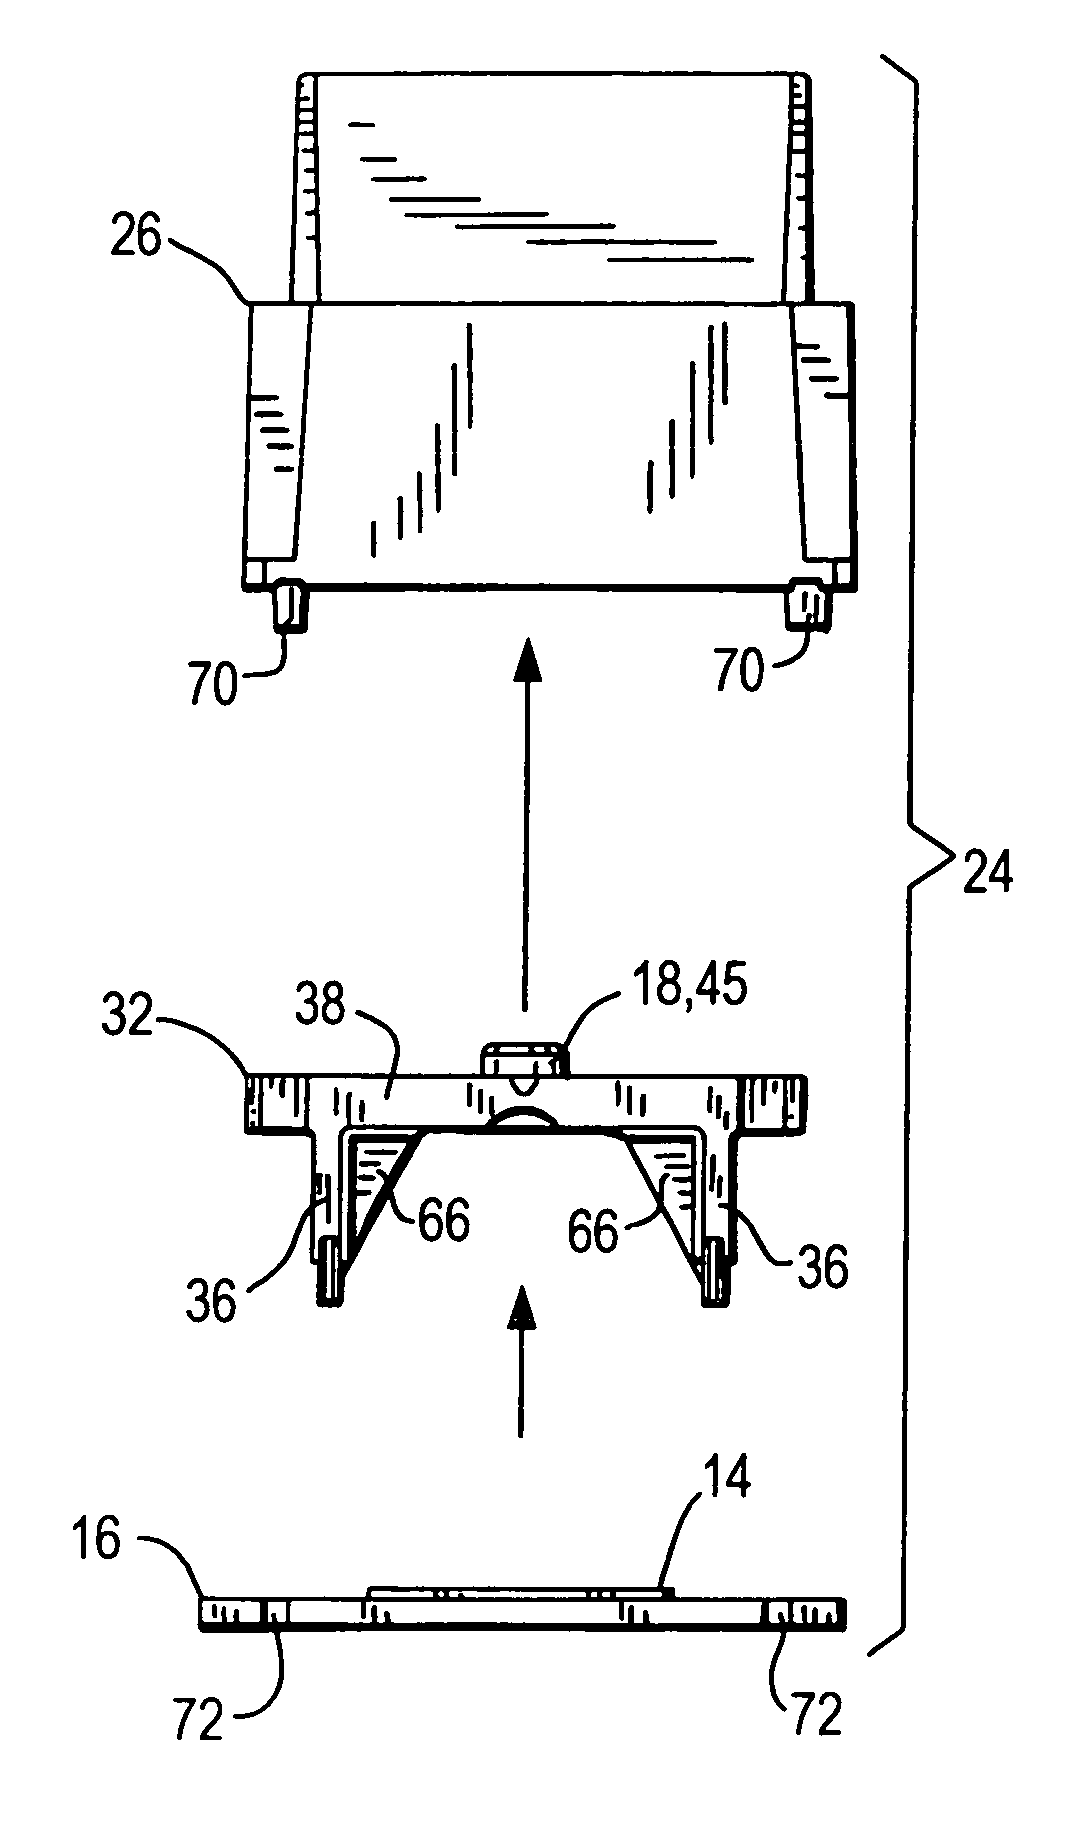 Light collection assembly with self-retaining lens in electro-optical reader